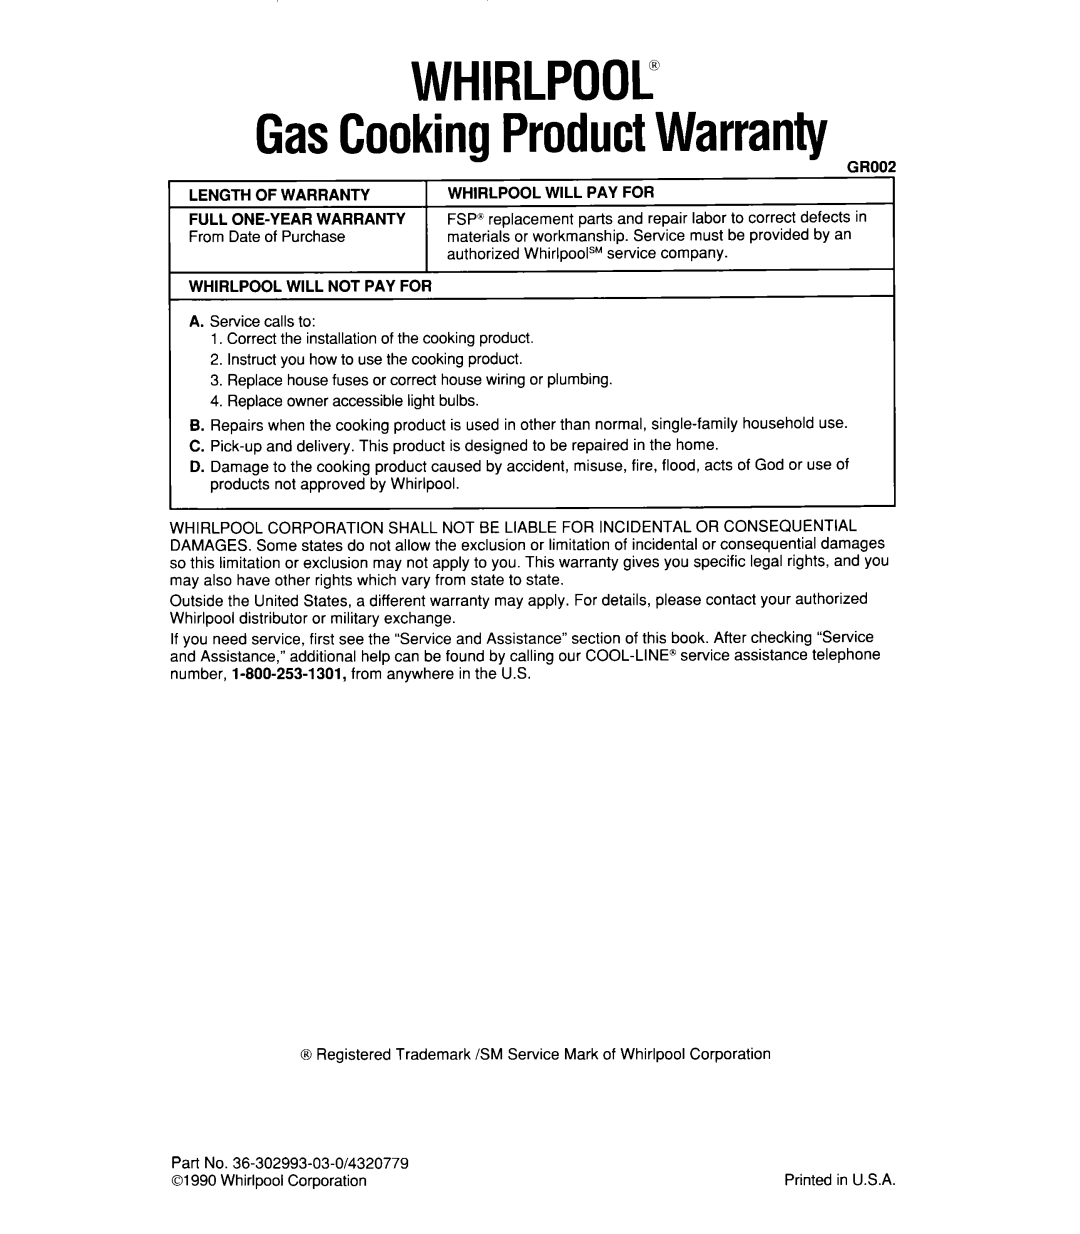 Whirlpool SBlOOPES manual WHIRLPOOL@ GasCookingProductWarranty, Whirlpool Will Pay For, Whirlpool Will Not Pay For 